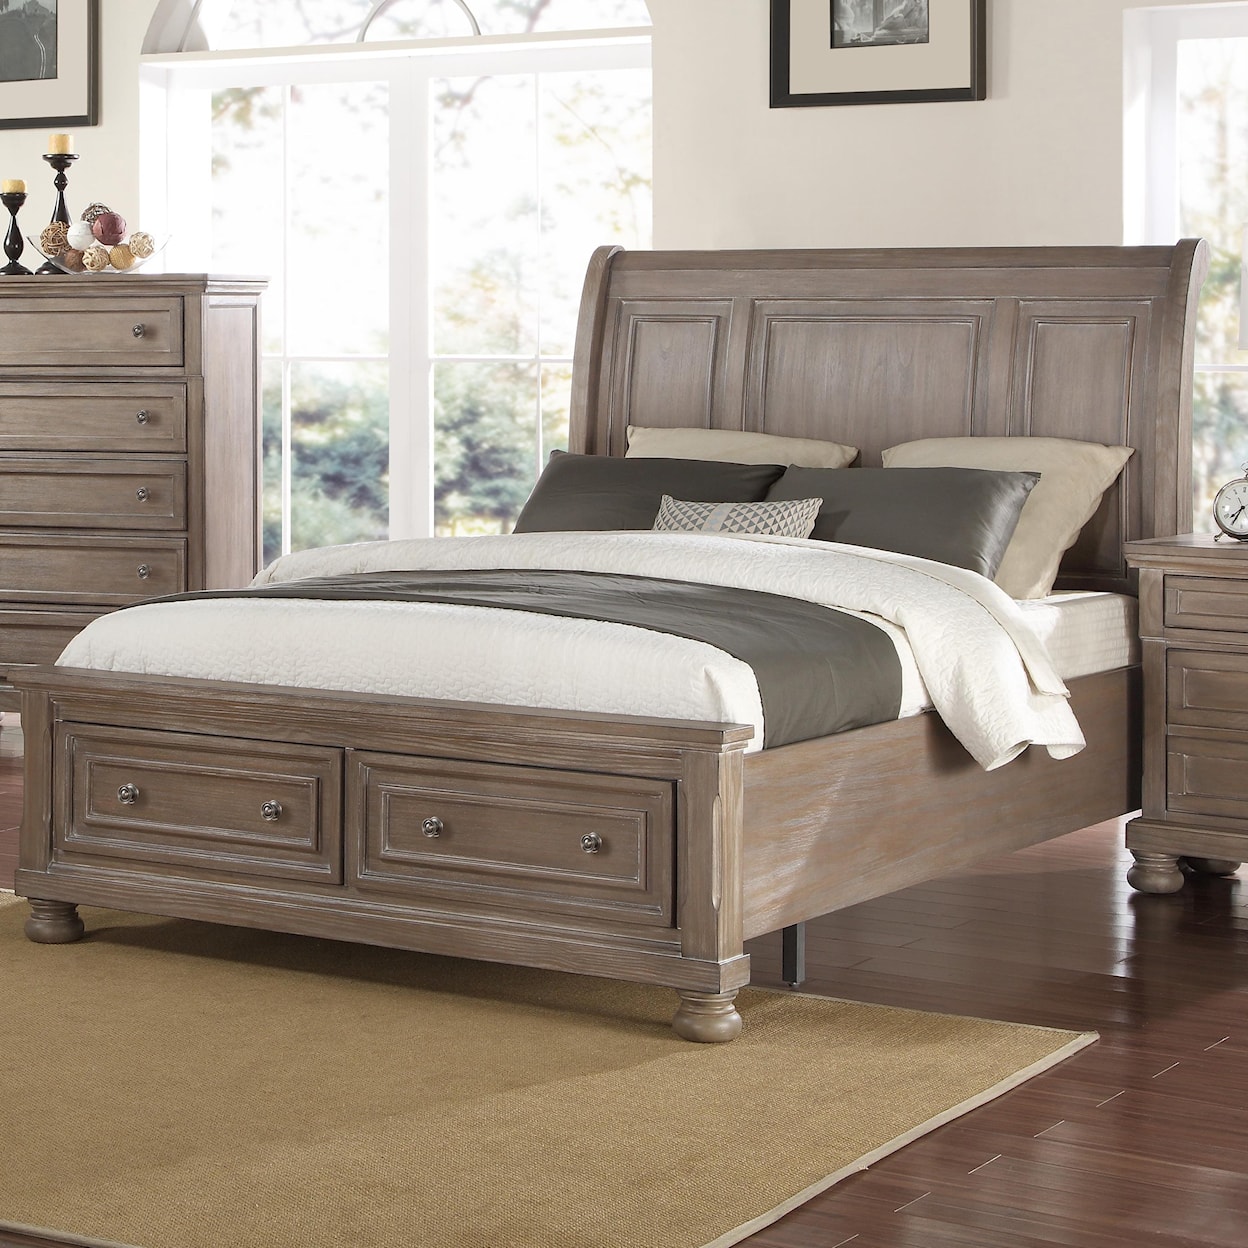 New Classic Allegra King Storage Bed